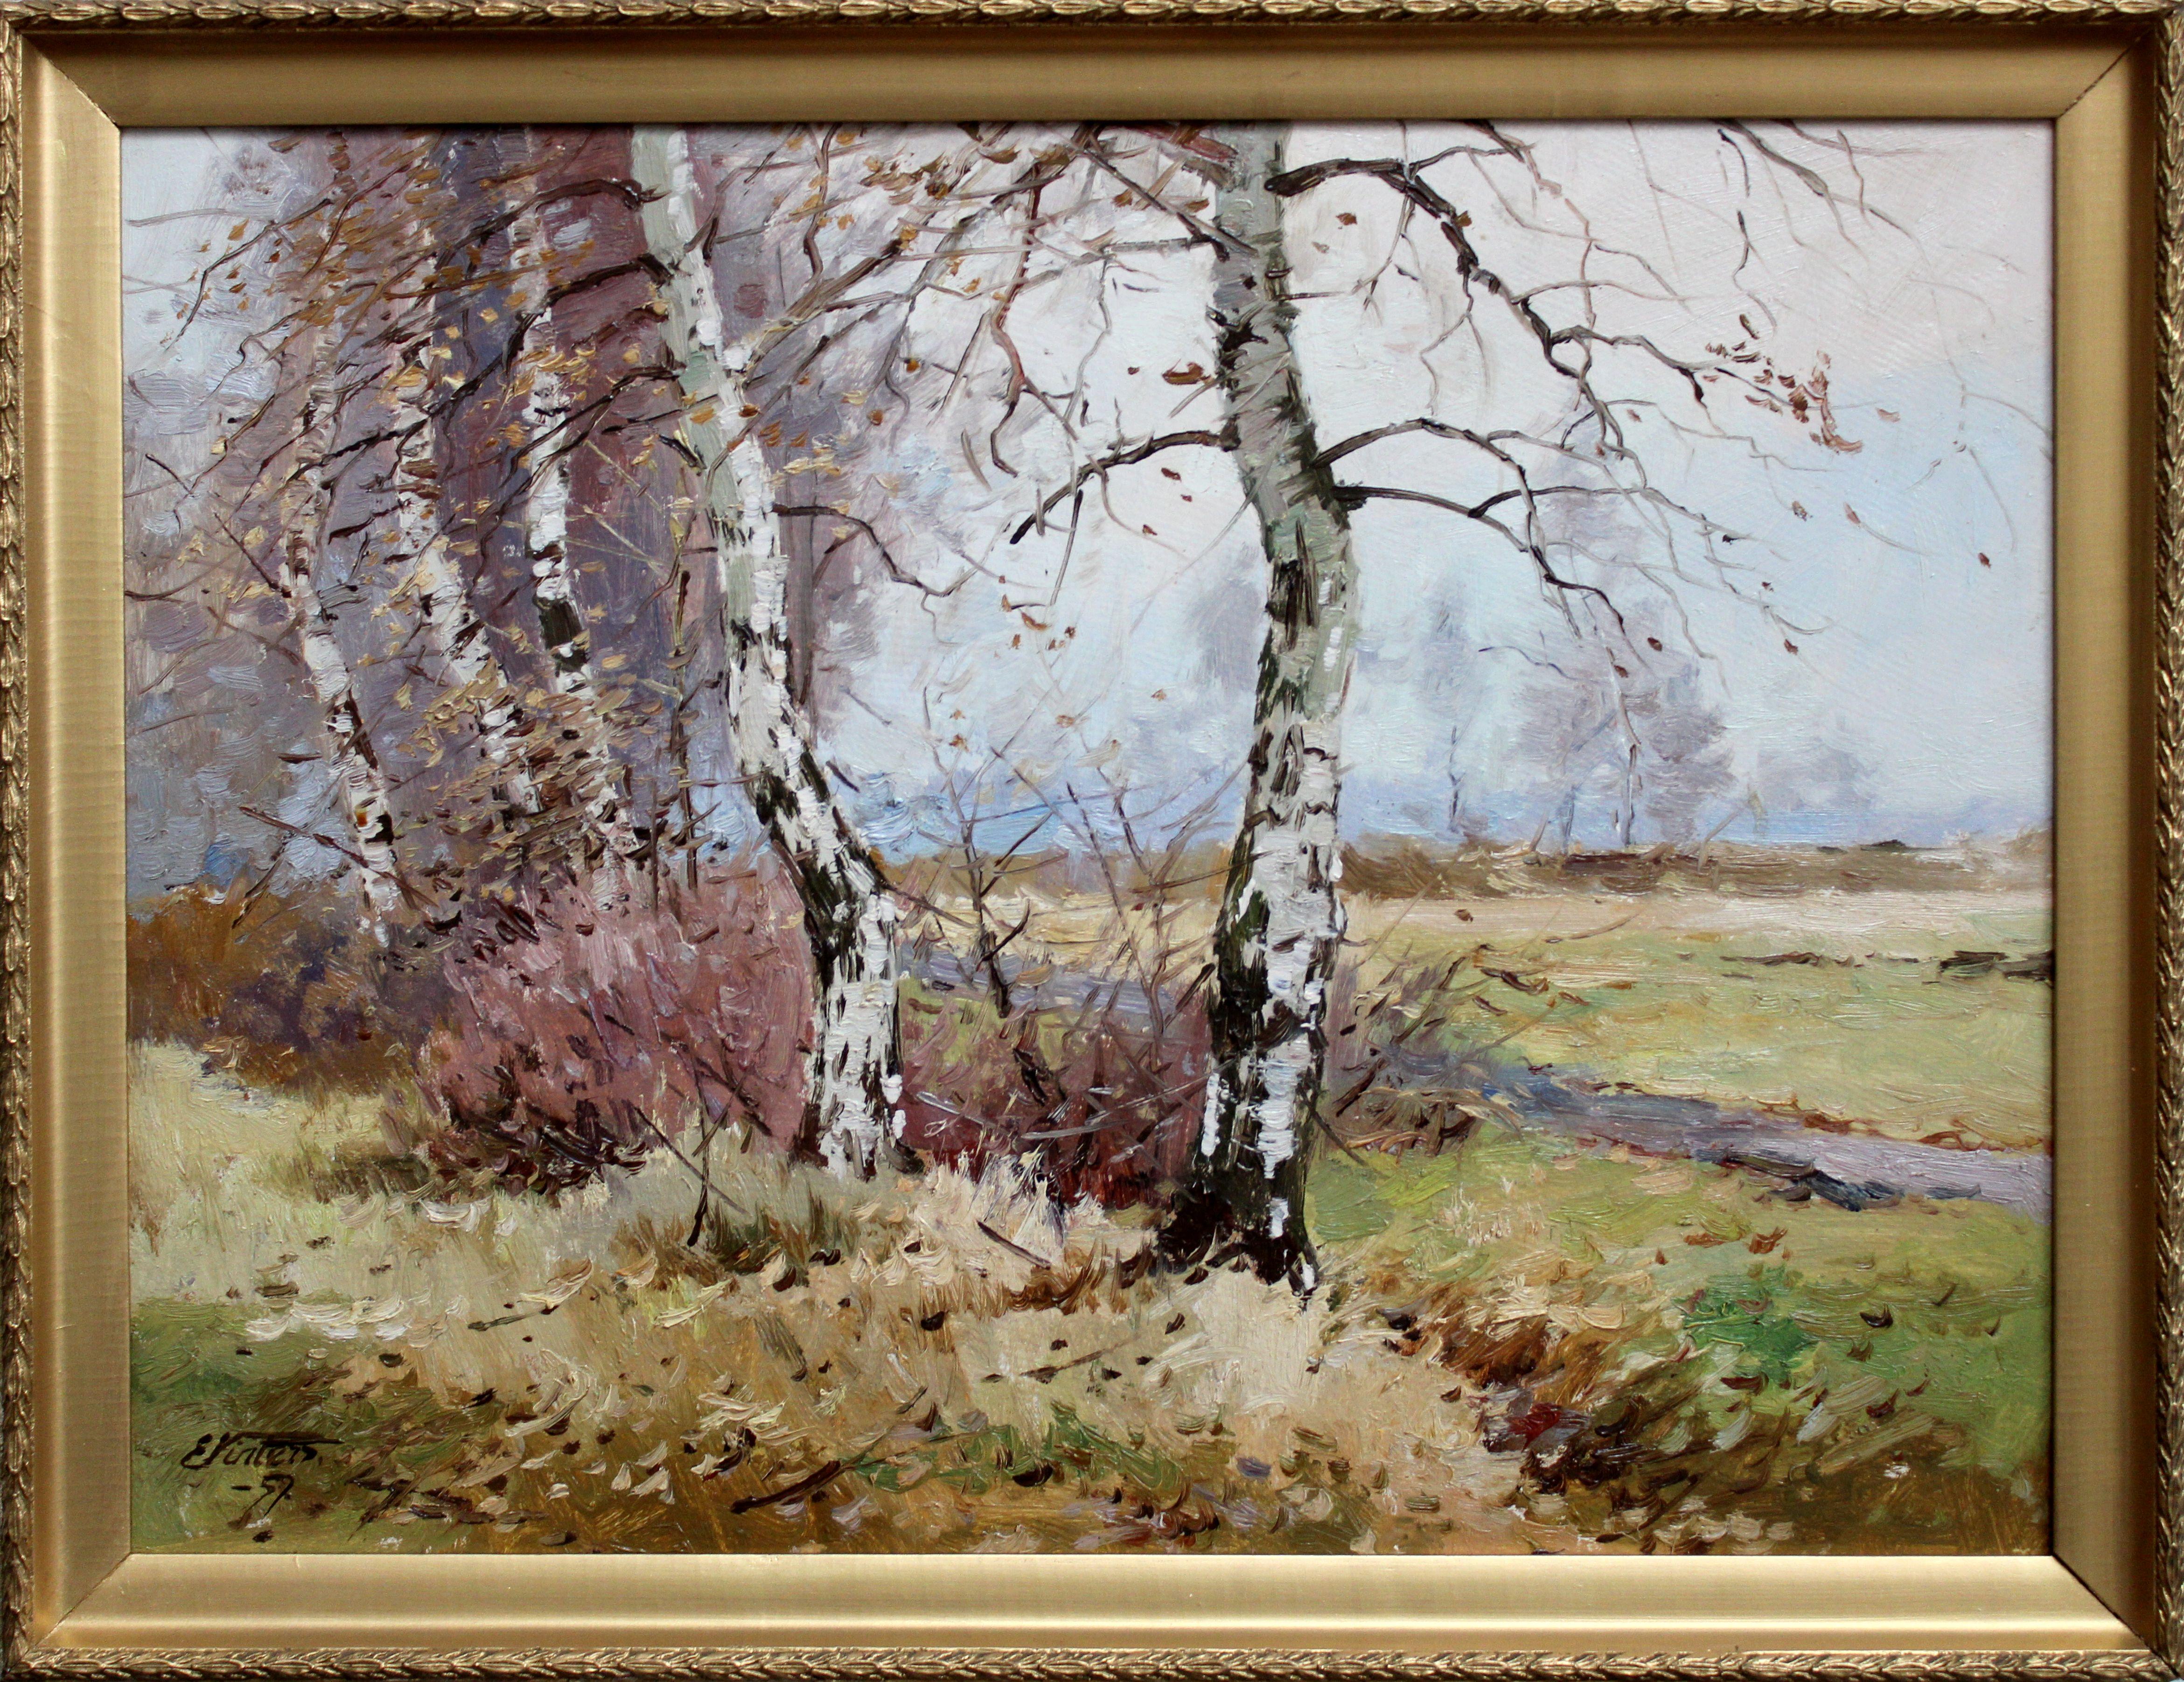 Birches. 1957, oil on cardboard, 45x60 cm - Painting by Edgars Vinters